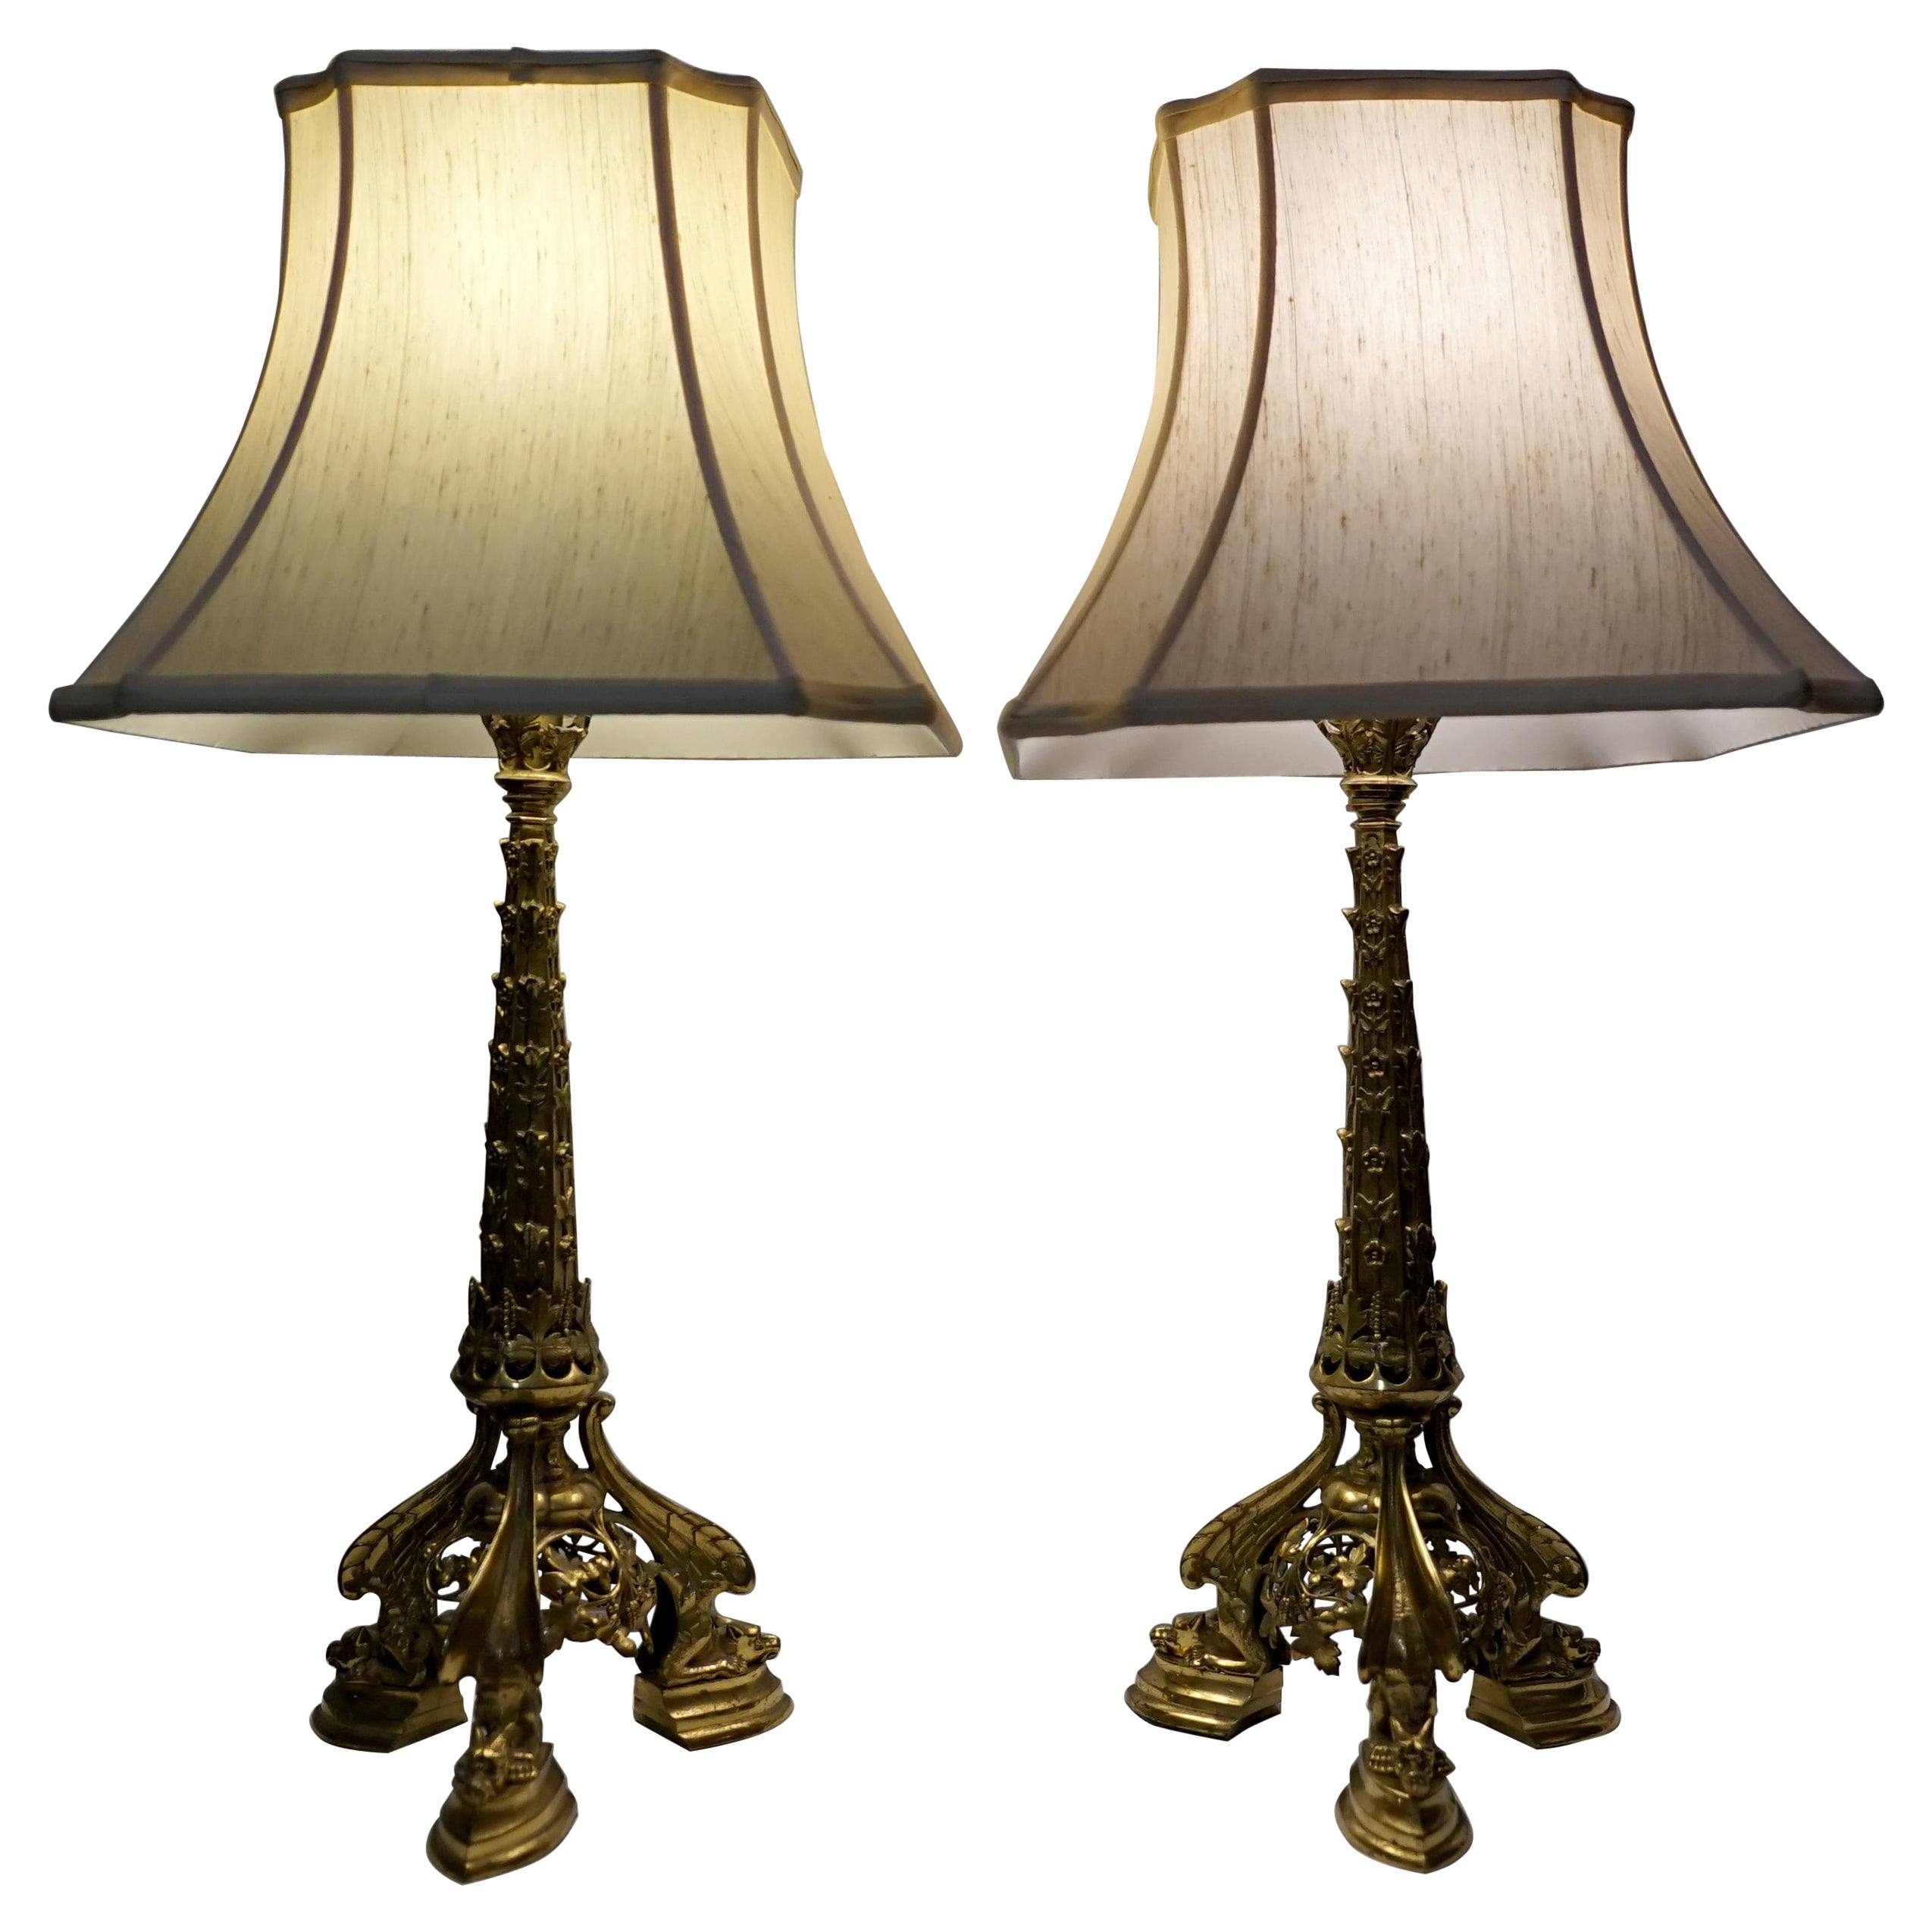 Pair of Cast Gilt Gargoyle Tower Bronze or Brass Table Lamps with Shades For Sale